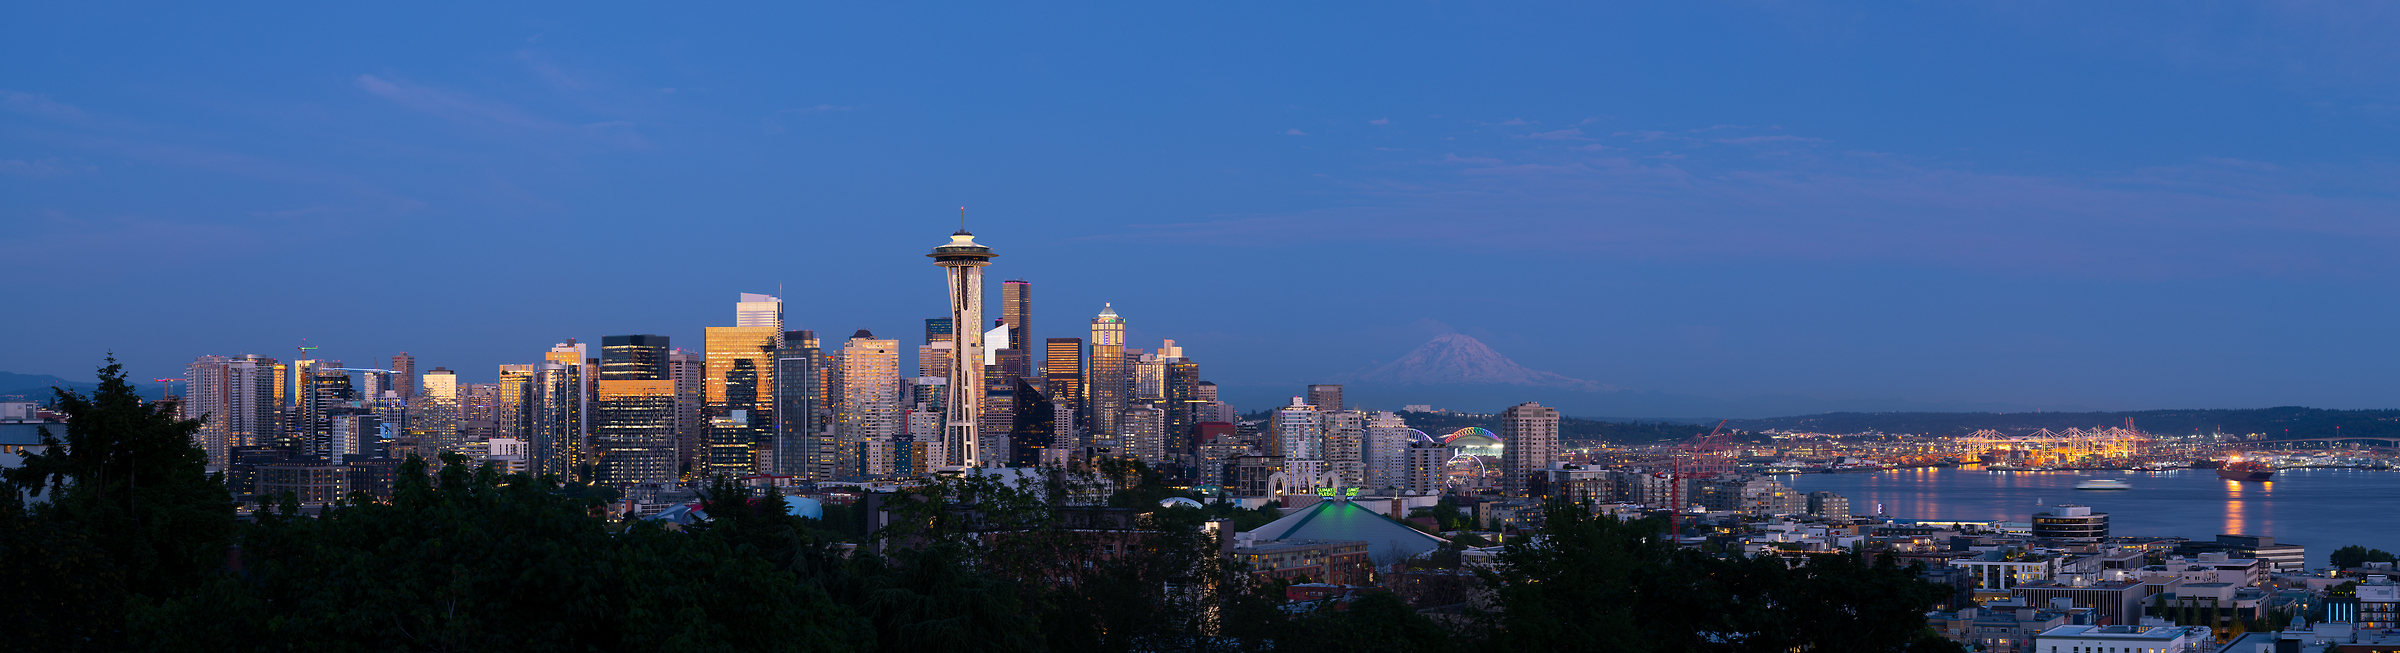 279 megapixels! A very high resolution, large-format VAST photo print of the Seattle skyline at dusk with Mt. Rainier in the background; wallpaper photograph created by Greg Probst in Kerry Park, Seattle, Washington